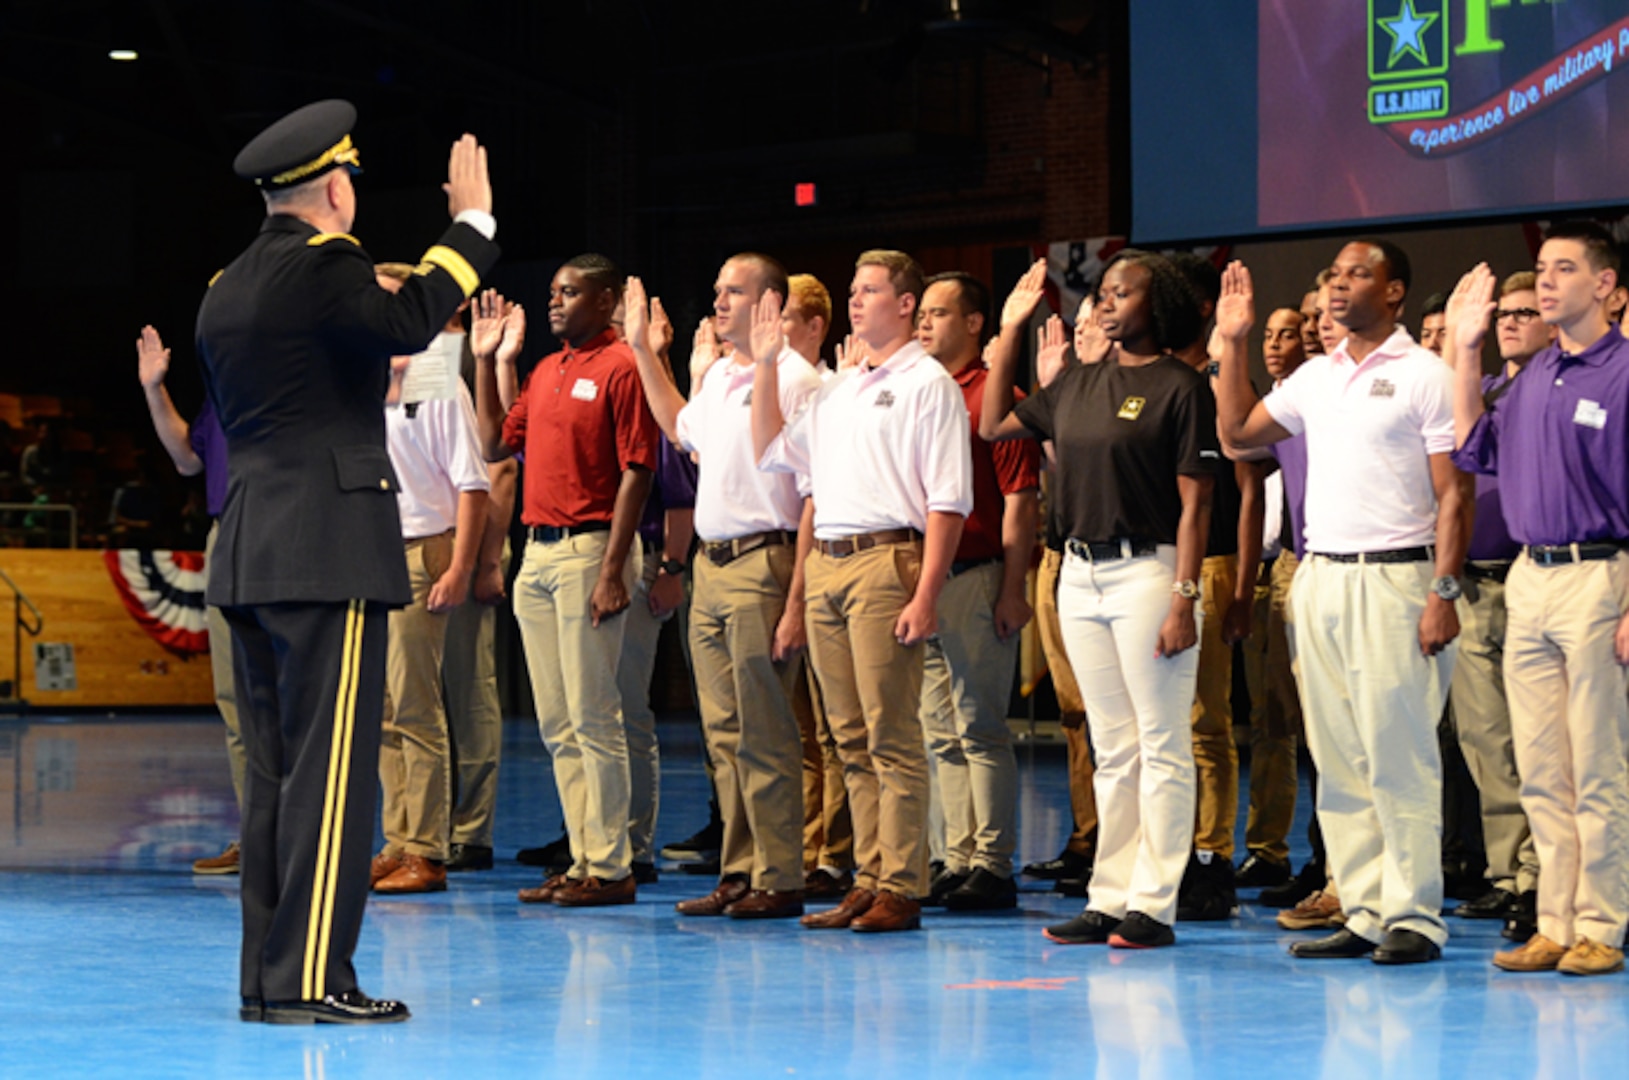 Kadavy swears in new Soldiers during Twilight Tattoo